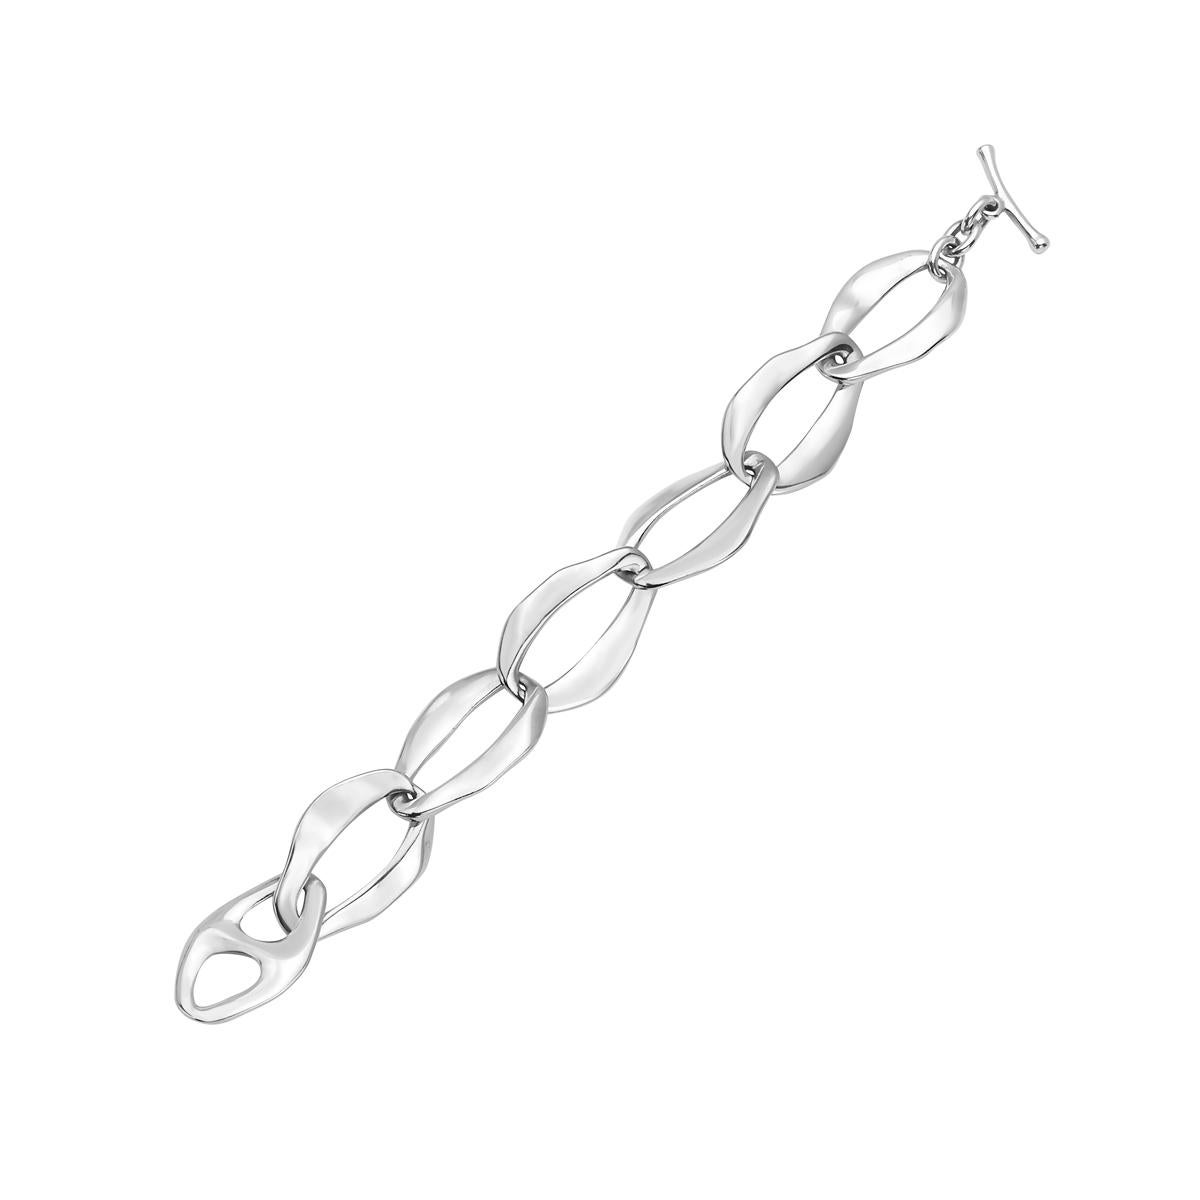 This bracelet features links that have edges smoothed as though by the waves of a vast sea. Sterling silver, small. 8